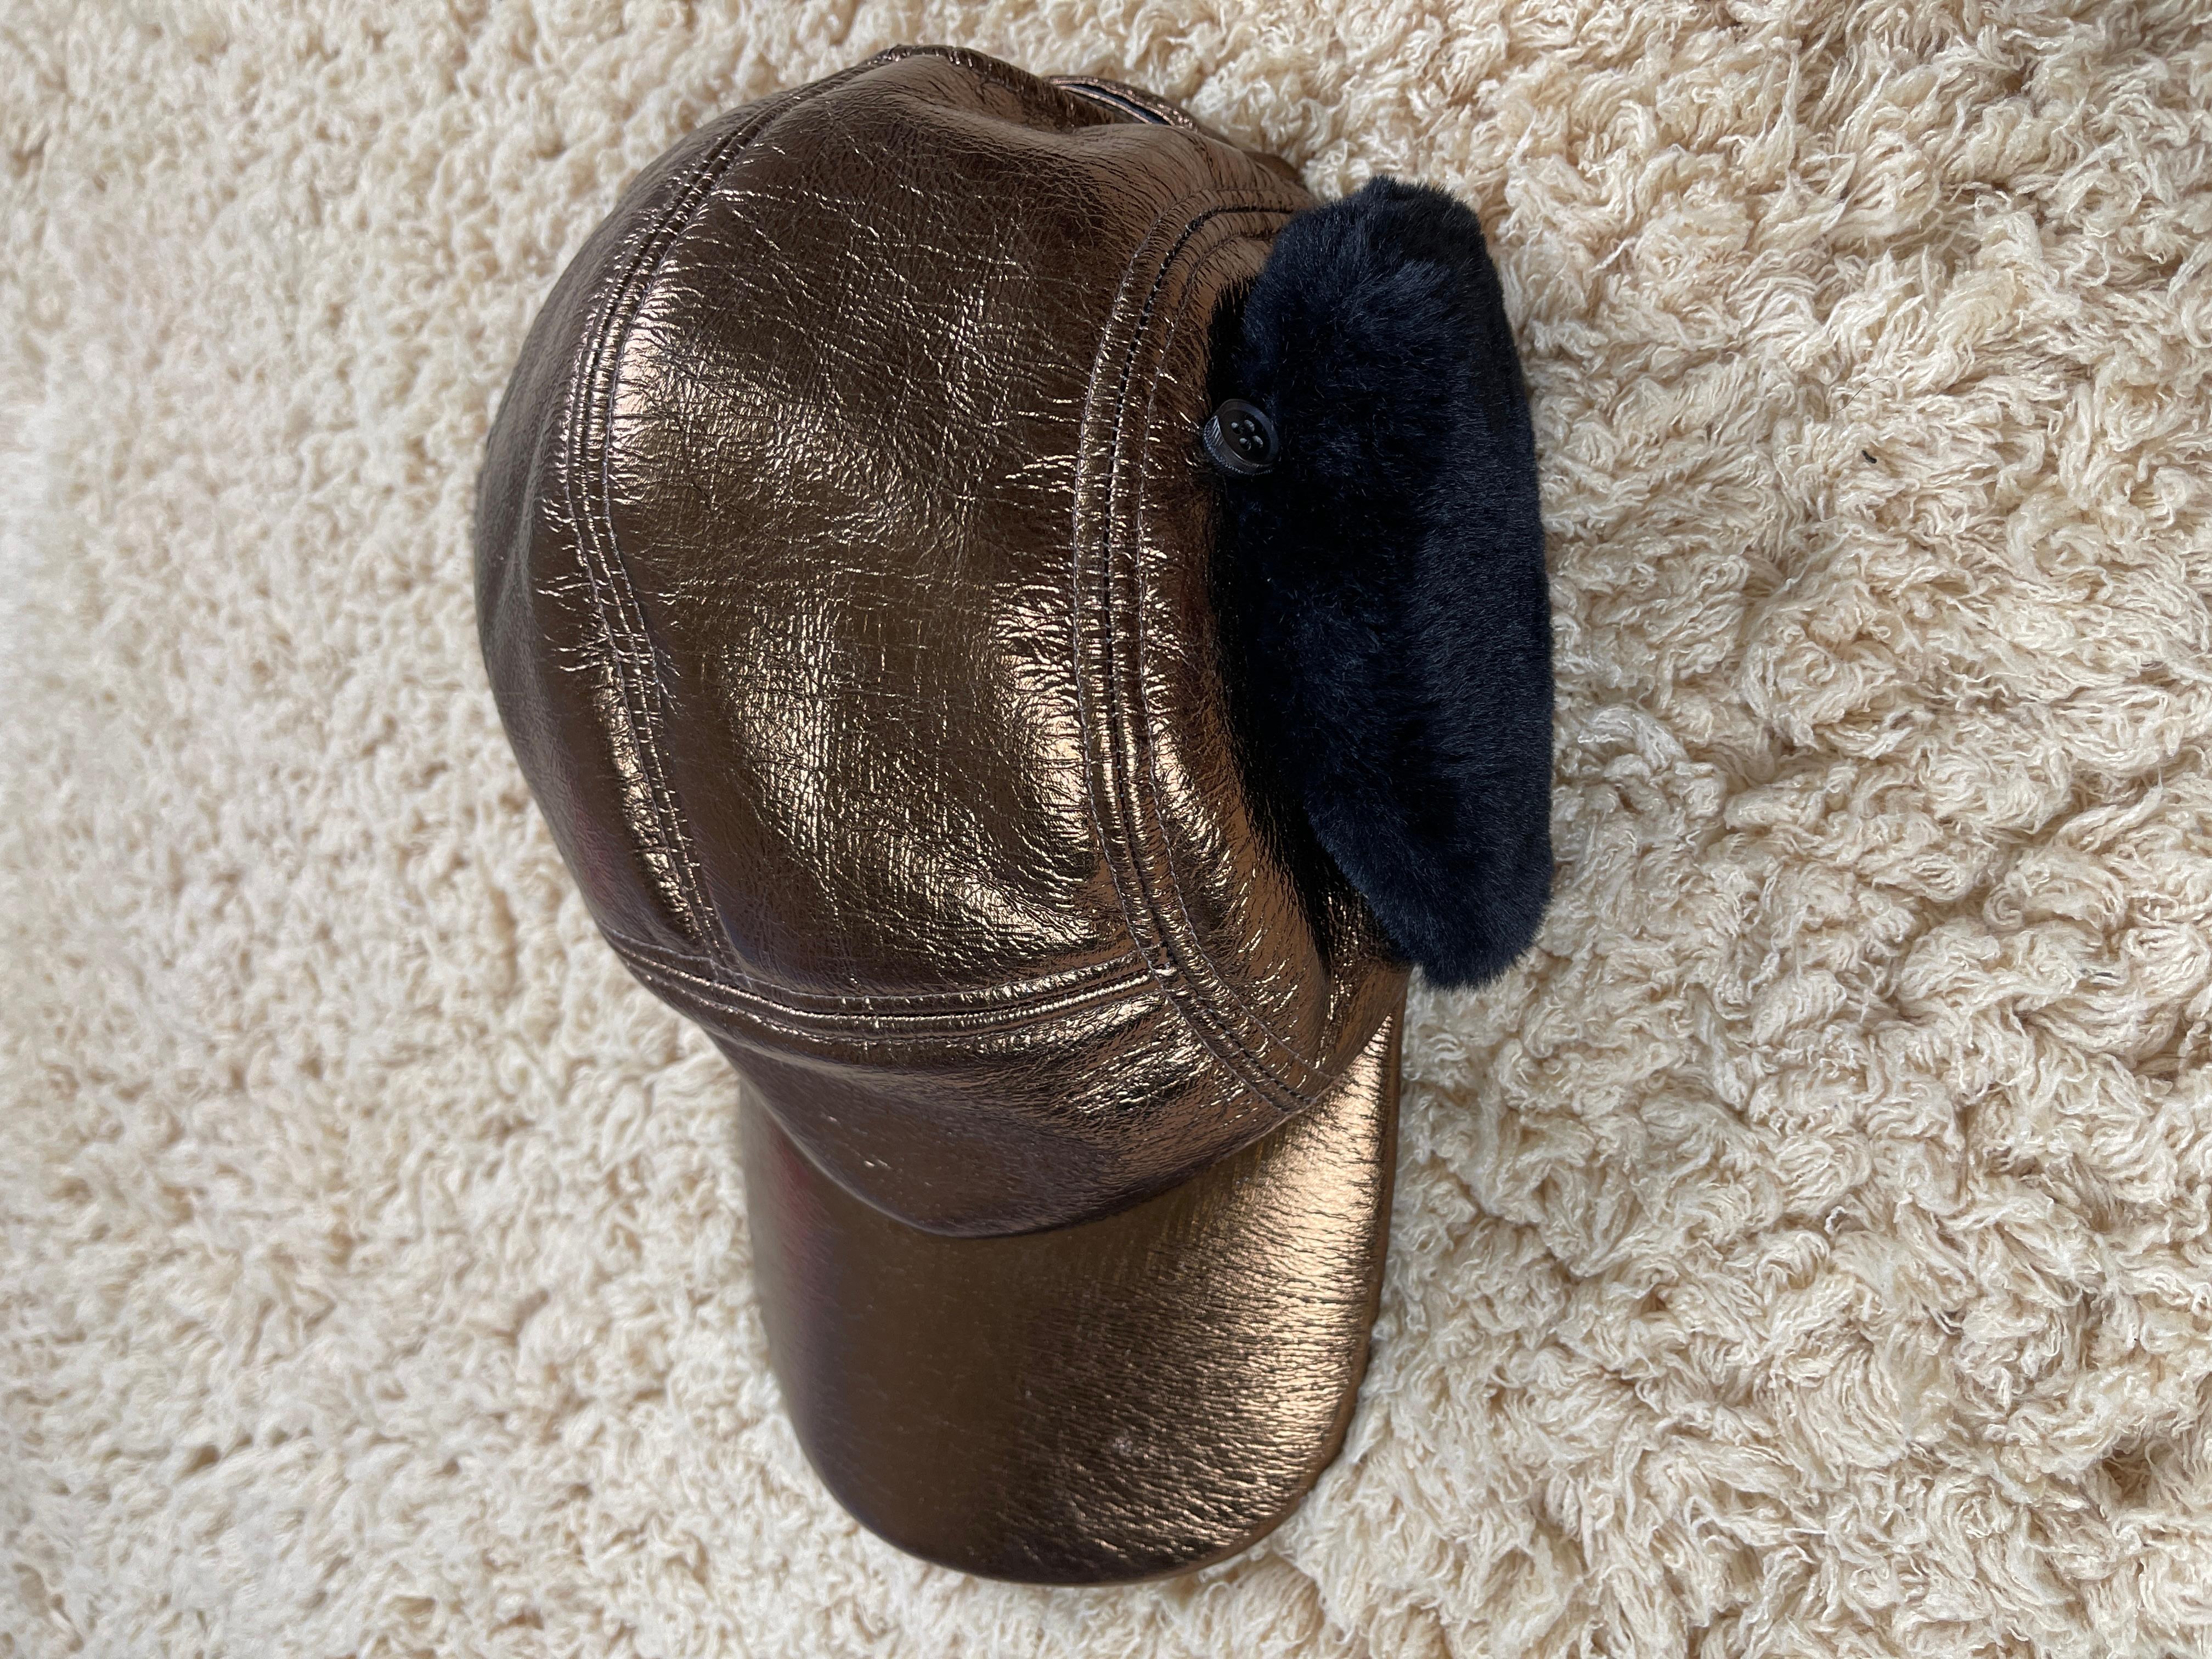 Lined with black faux-fur for the ear flaps, Feng Chen Wang demonstrates how she effortlessly has incorporated textures into this collection through the worn vintage feel of this cap. Coated in an almost metallic copper coating and finished with a